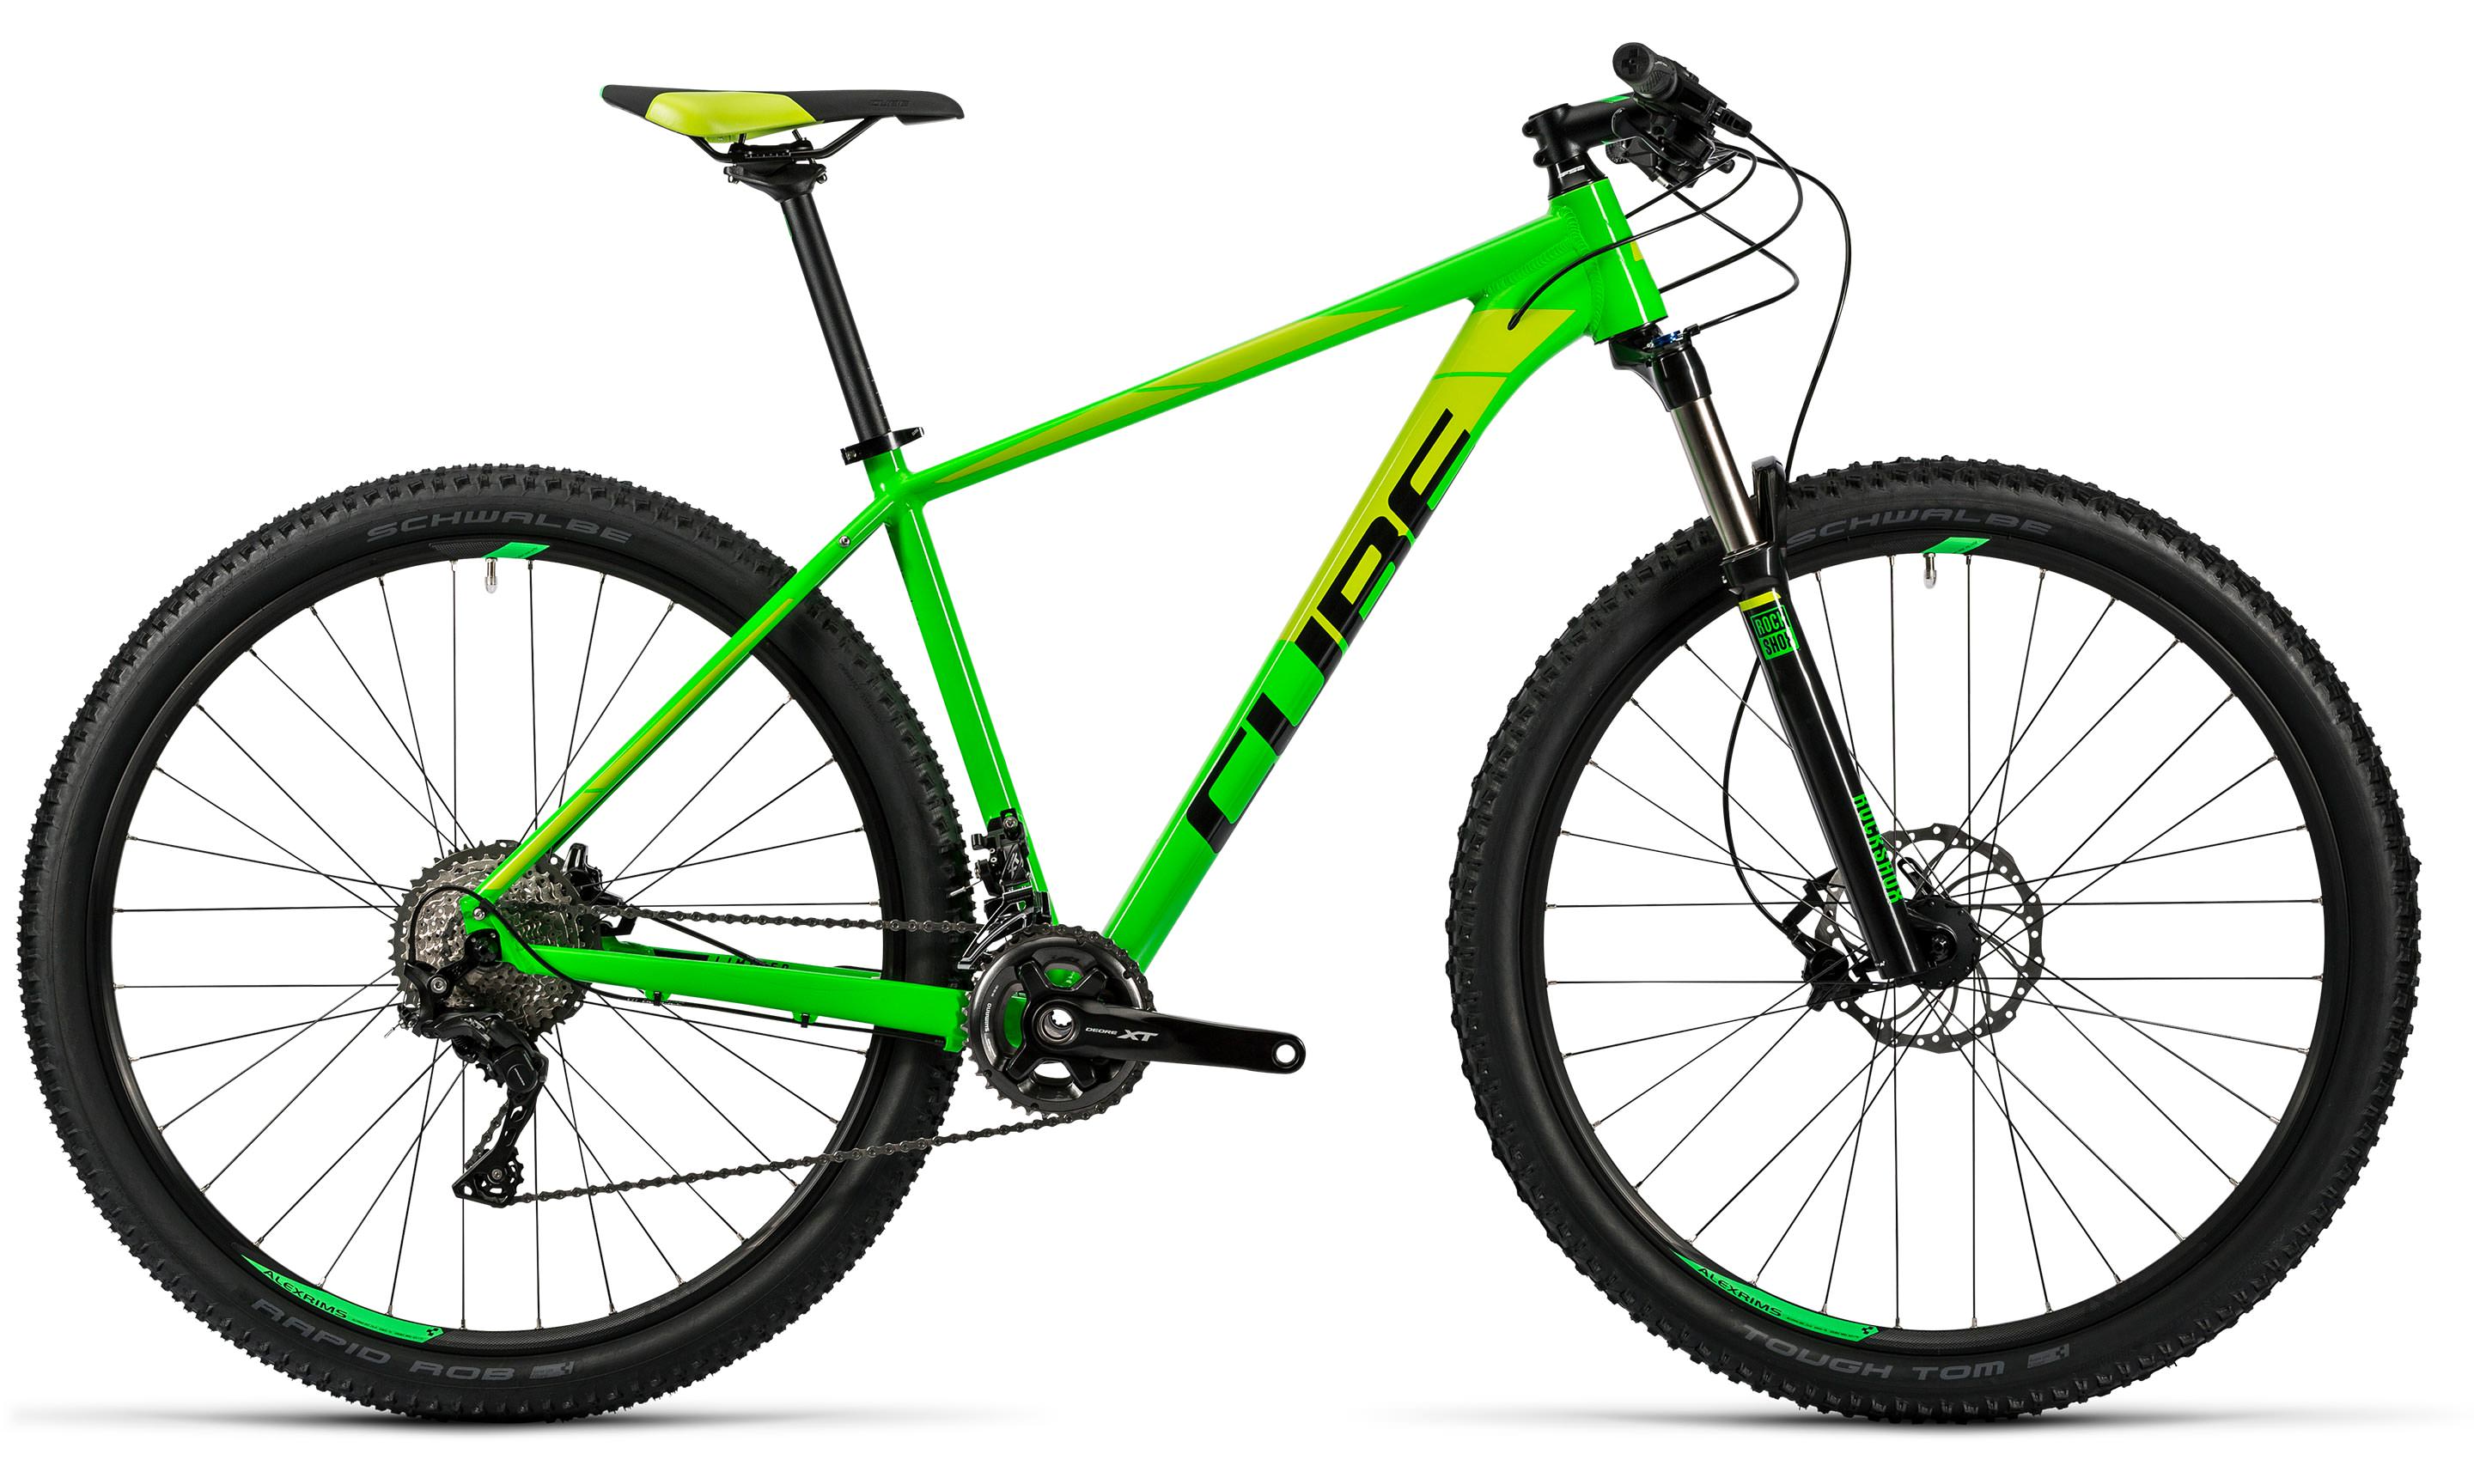 LTD Pro 2x green | Bouticycle